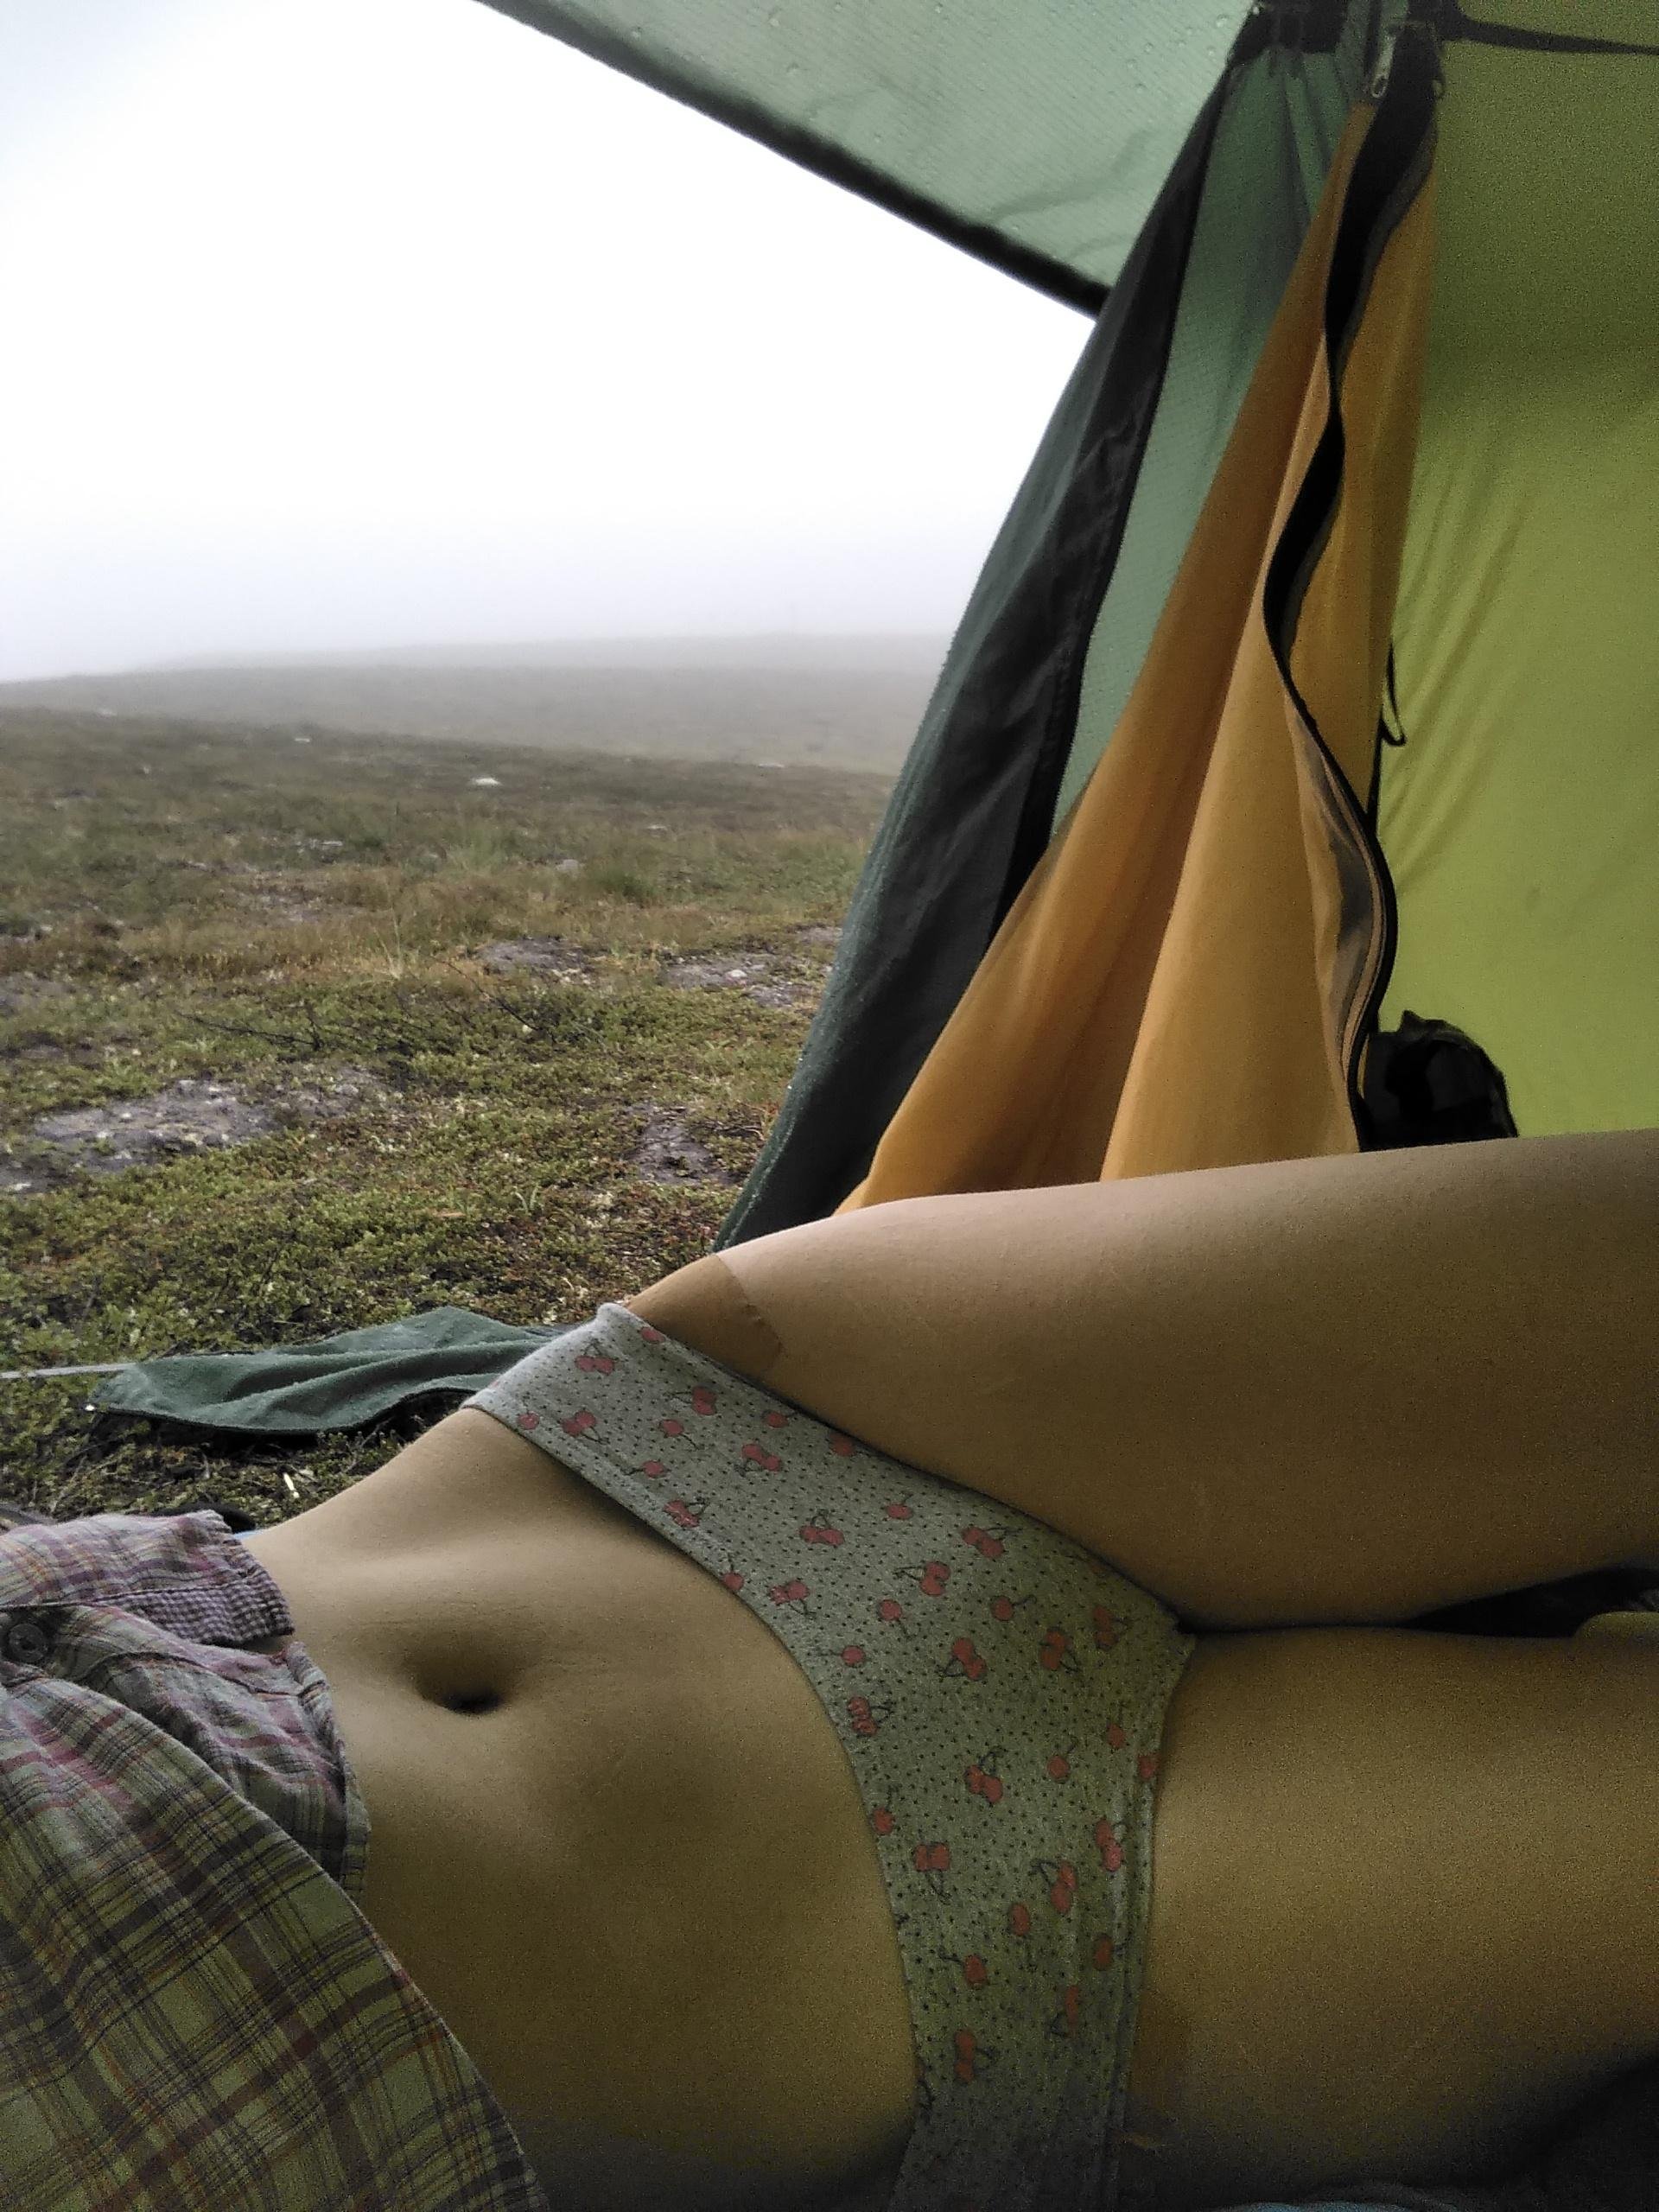 In the tent, in the rain, in the mountains. Should get dressed, pack up, and keep hiking. Don't wanna.